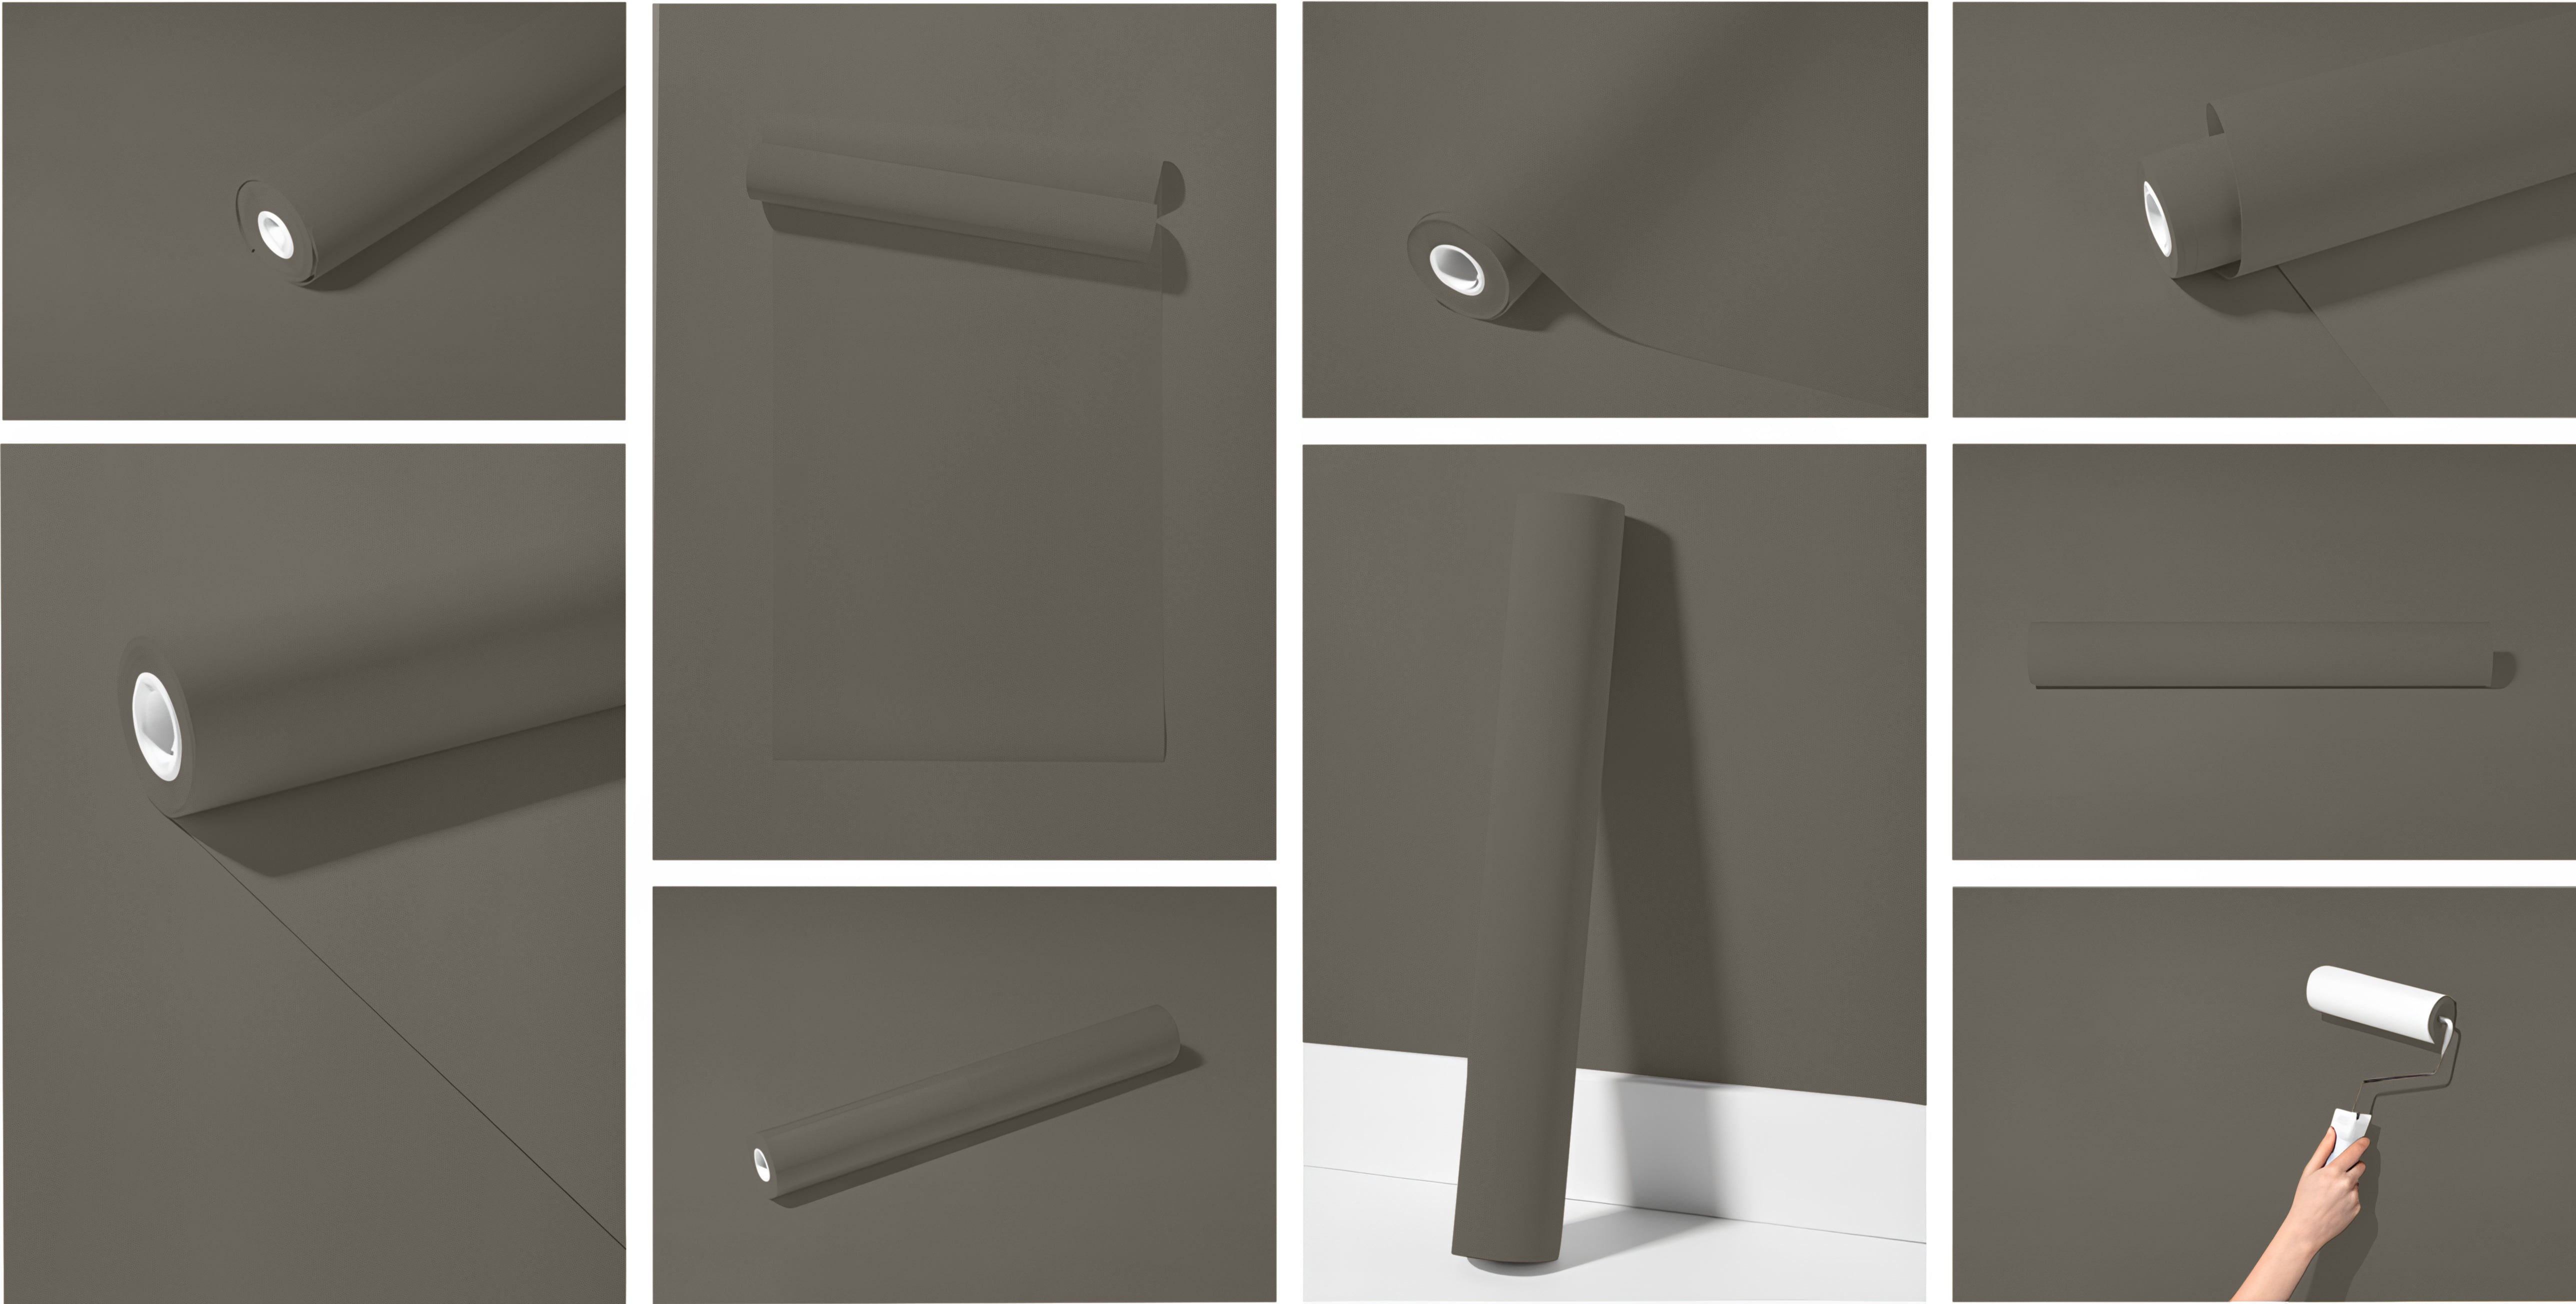 Peel & Stick Removable Re-usable Paint - Color RAL 7039 Quartz Grey - offRAL™ - RALRAW LLC, USA